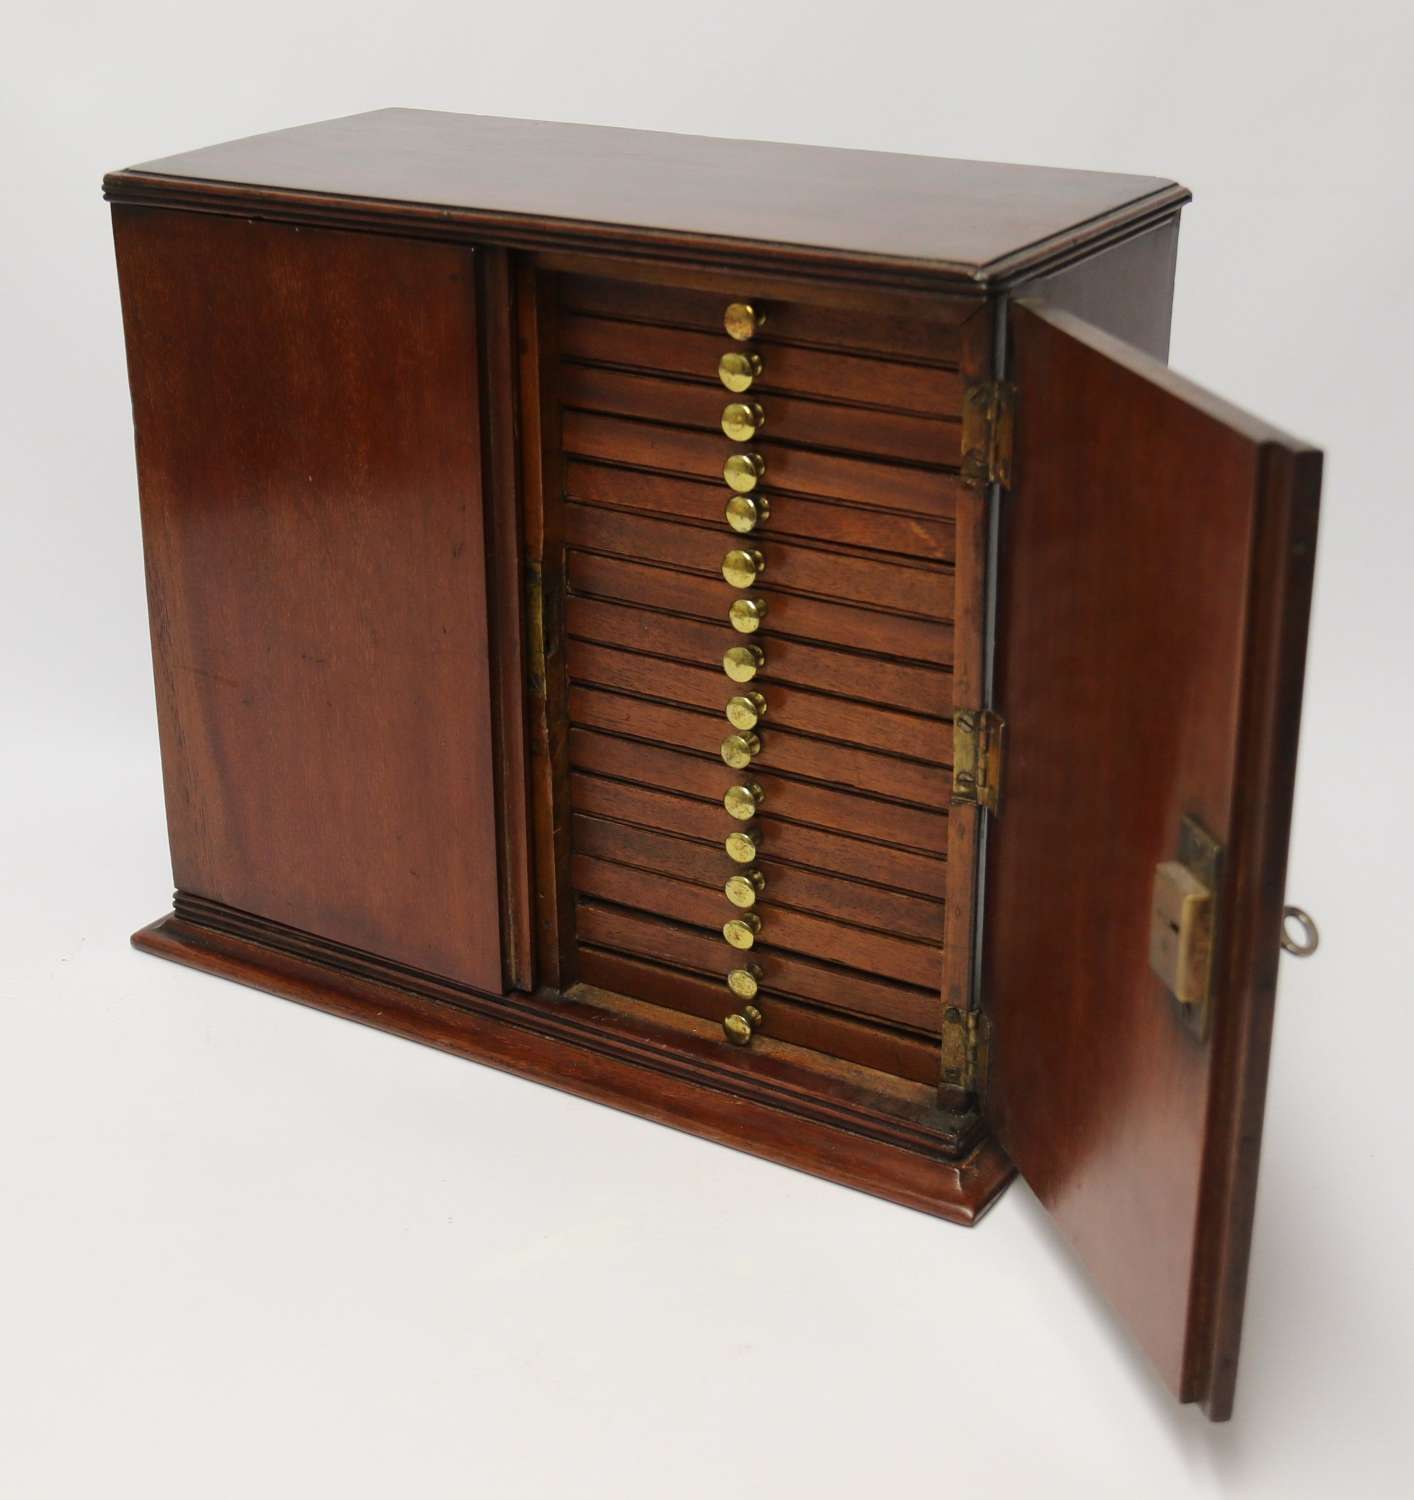 19th century  Victorian collectors coin cabinet with 32 drawers